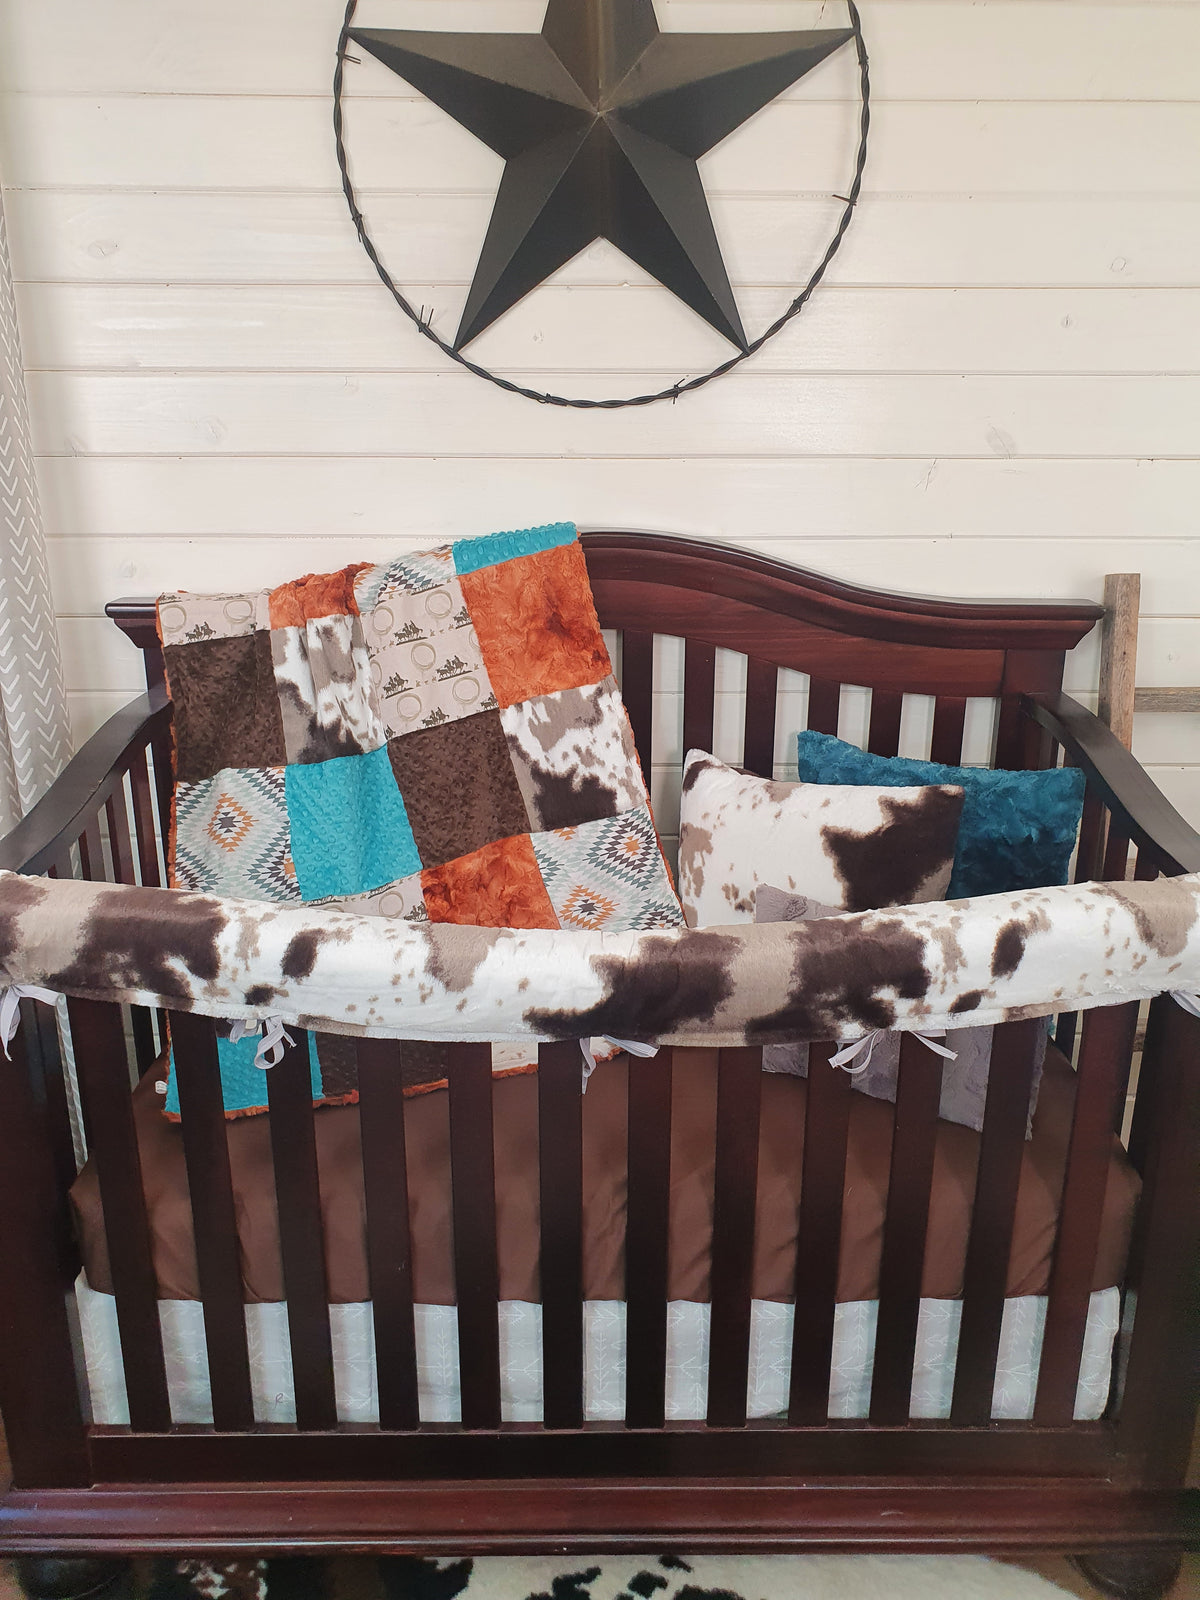 New Release Boy Crib Bedding - Team Roping Cowboy and Brown Sugar Cow Minky Western Baby Bedding Collection - DBC Baby Bedding Co 